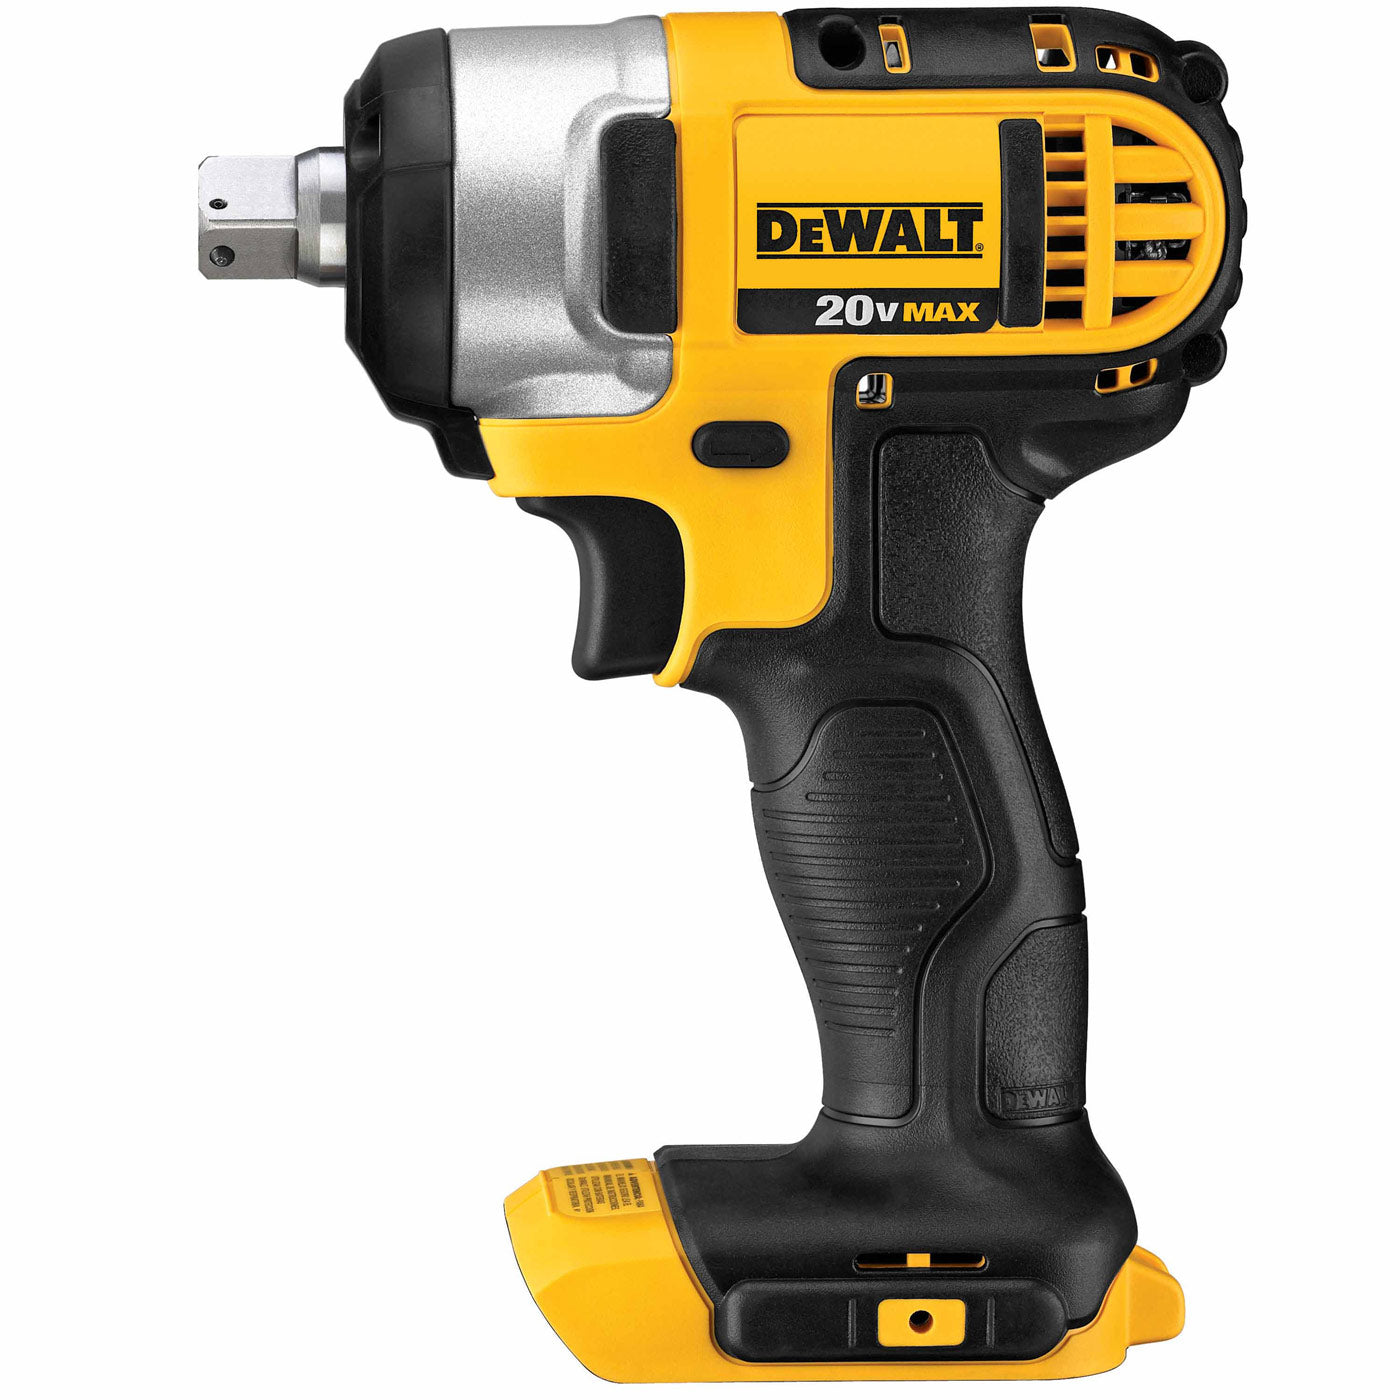 DeWalt DCF880B 20V MAX Lithium Ion 1/2" Impact Wrench with Detent Pin, Tool Only